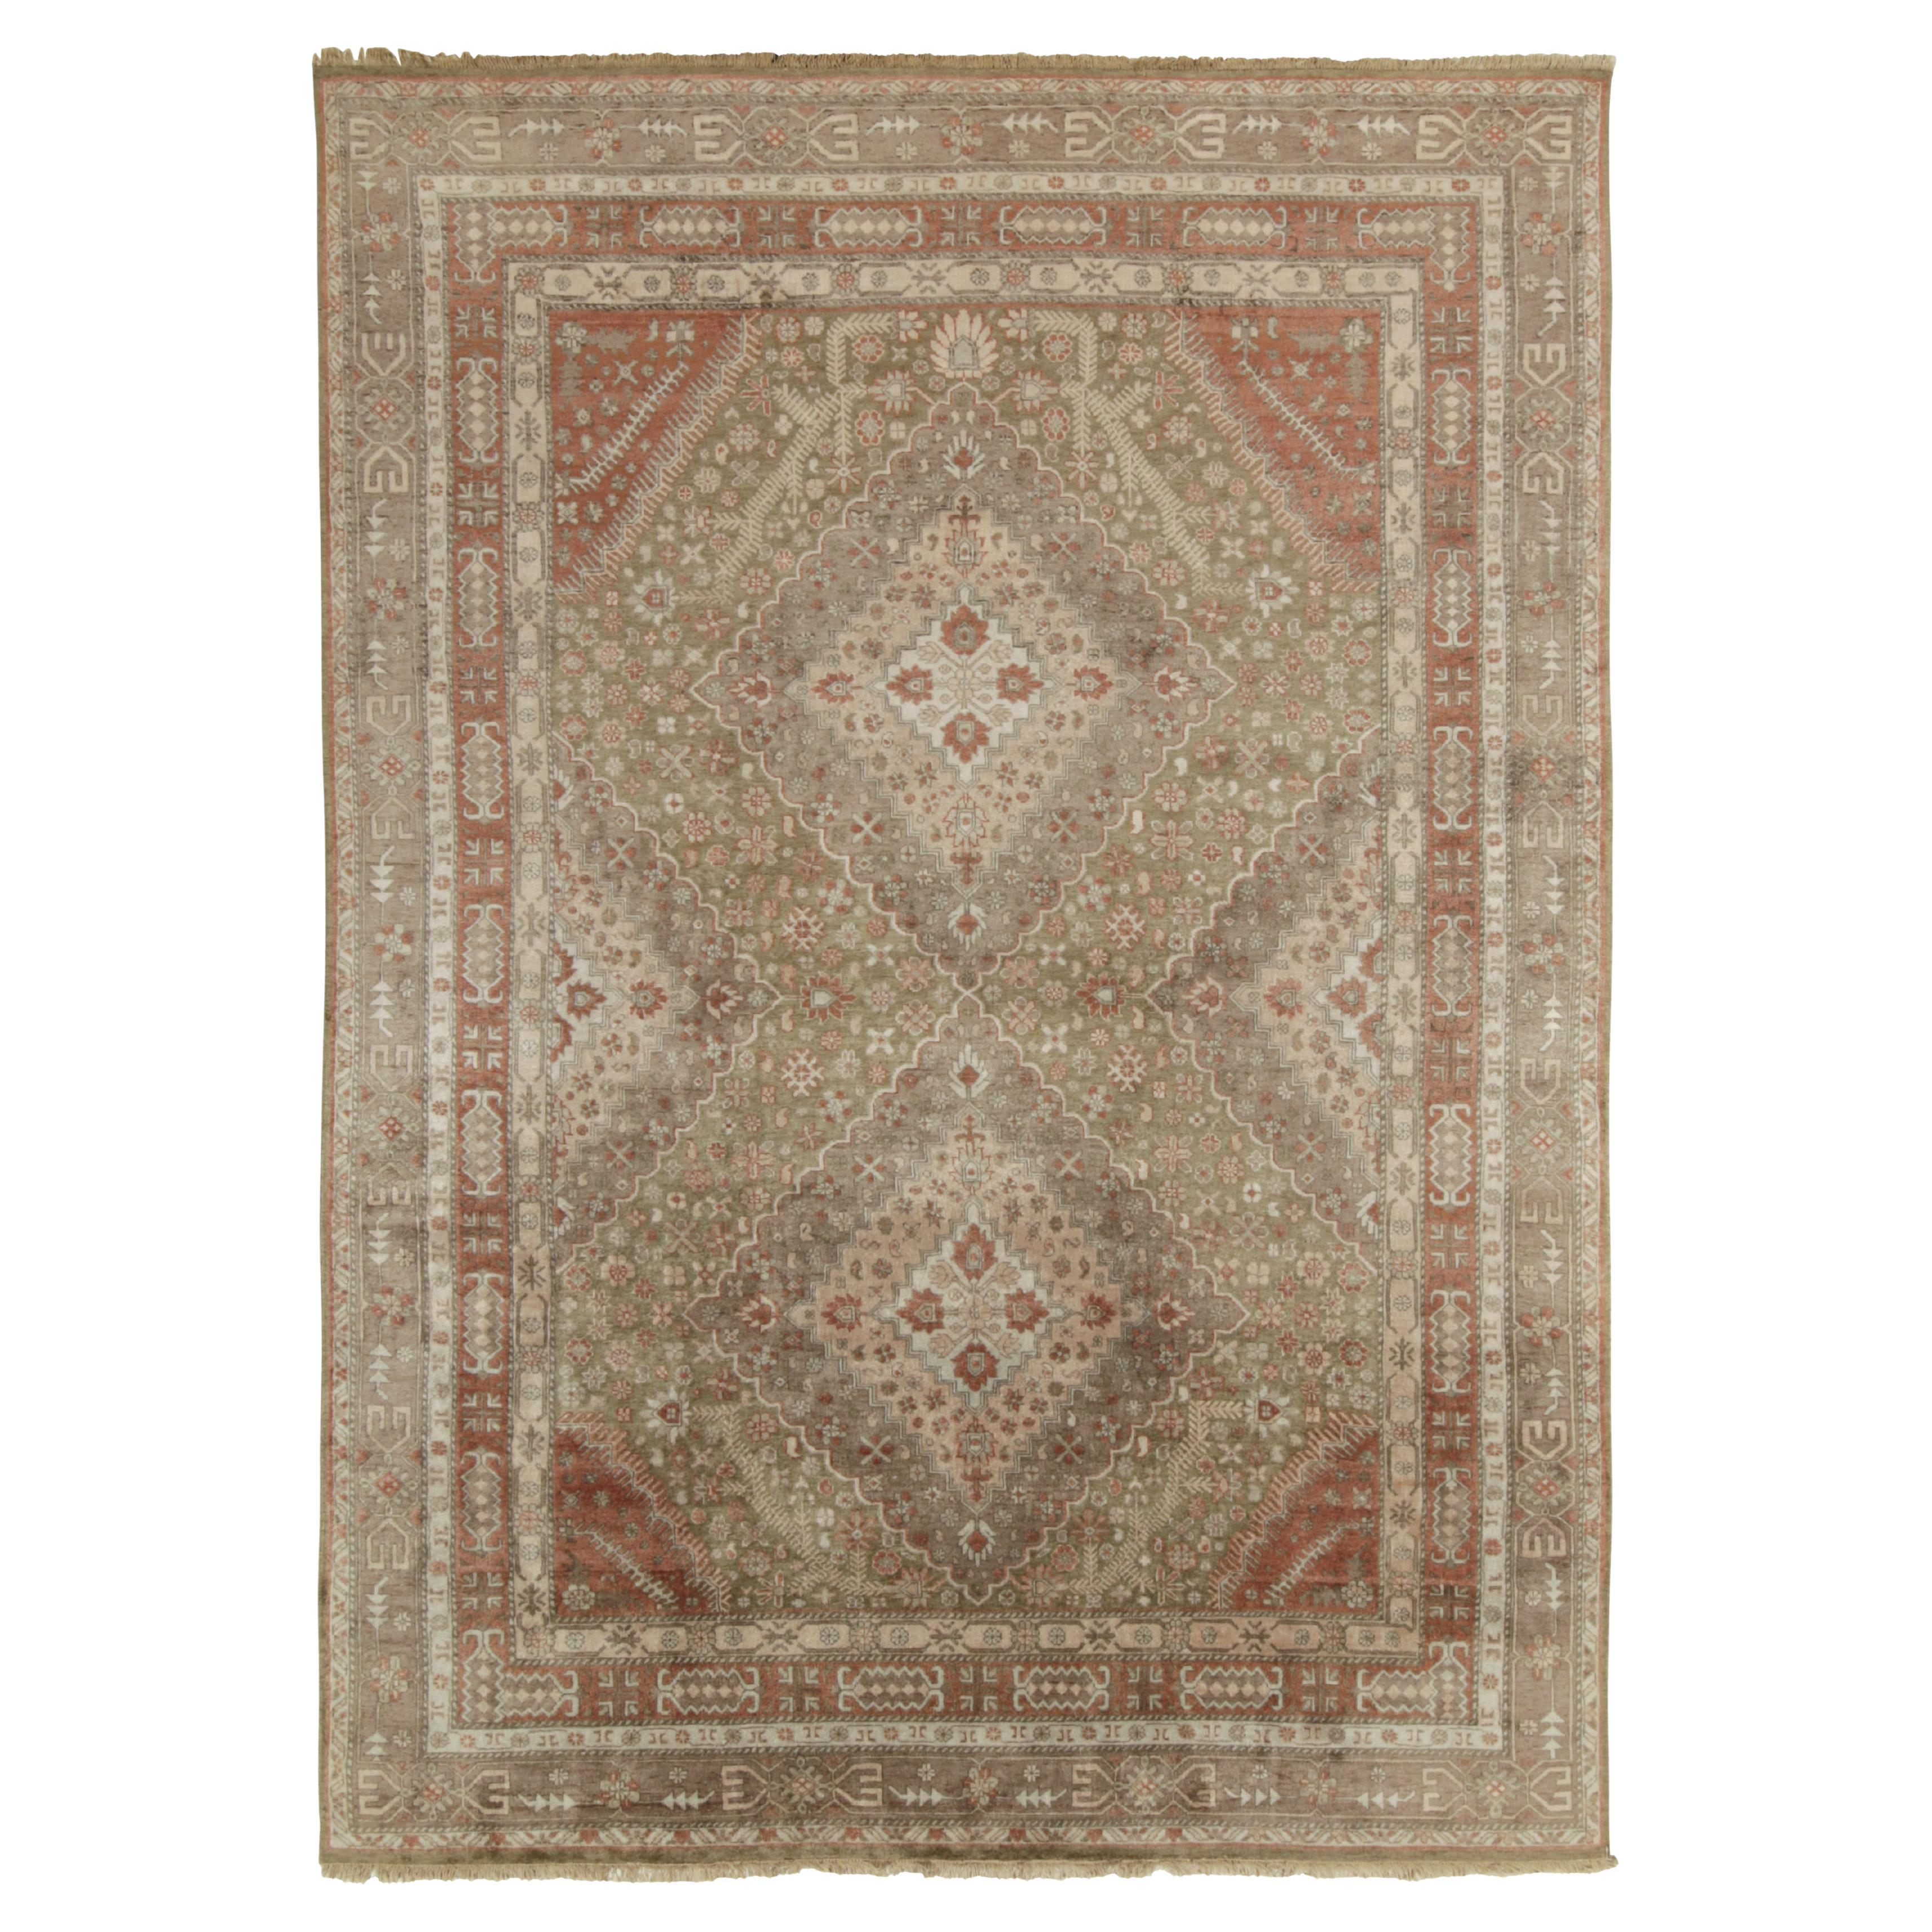 Rug & Kilim’s Classic Khotan Style Rug in Beige, Rust and Ivory Floral Patterns For Sale